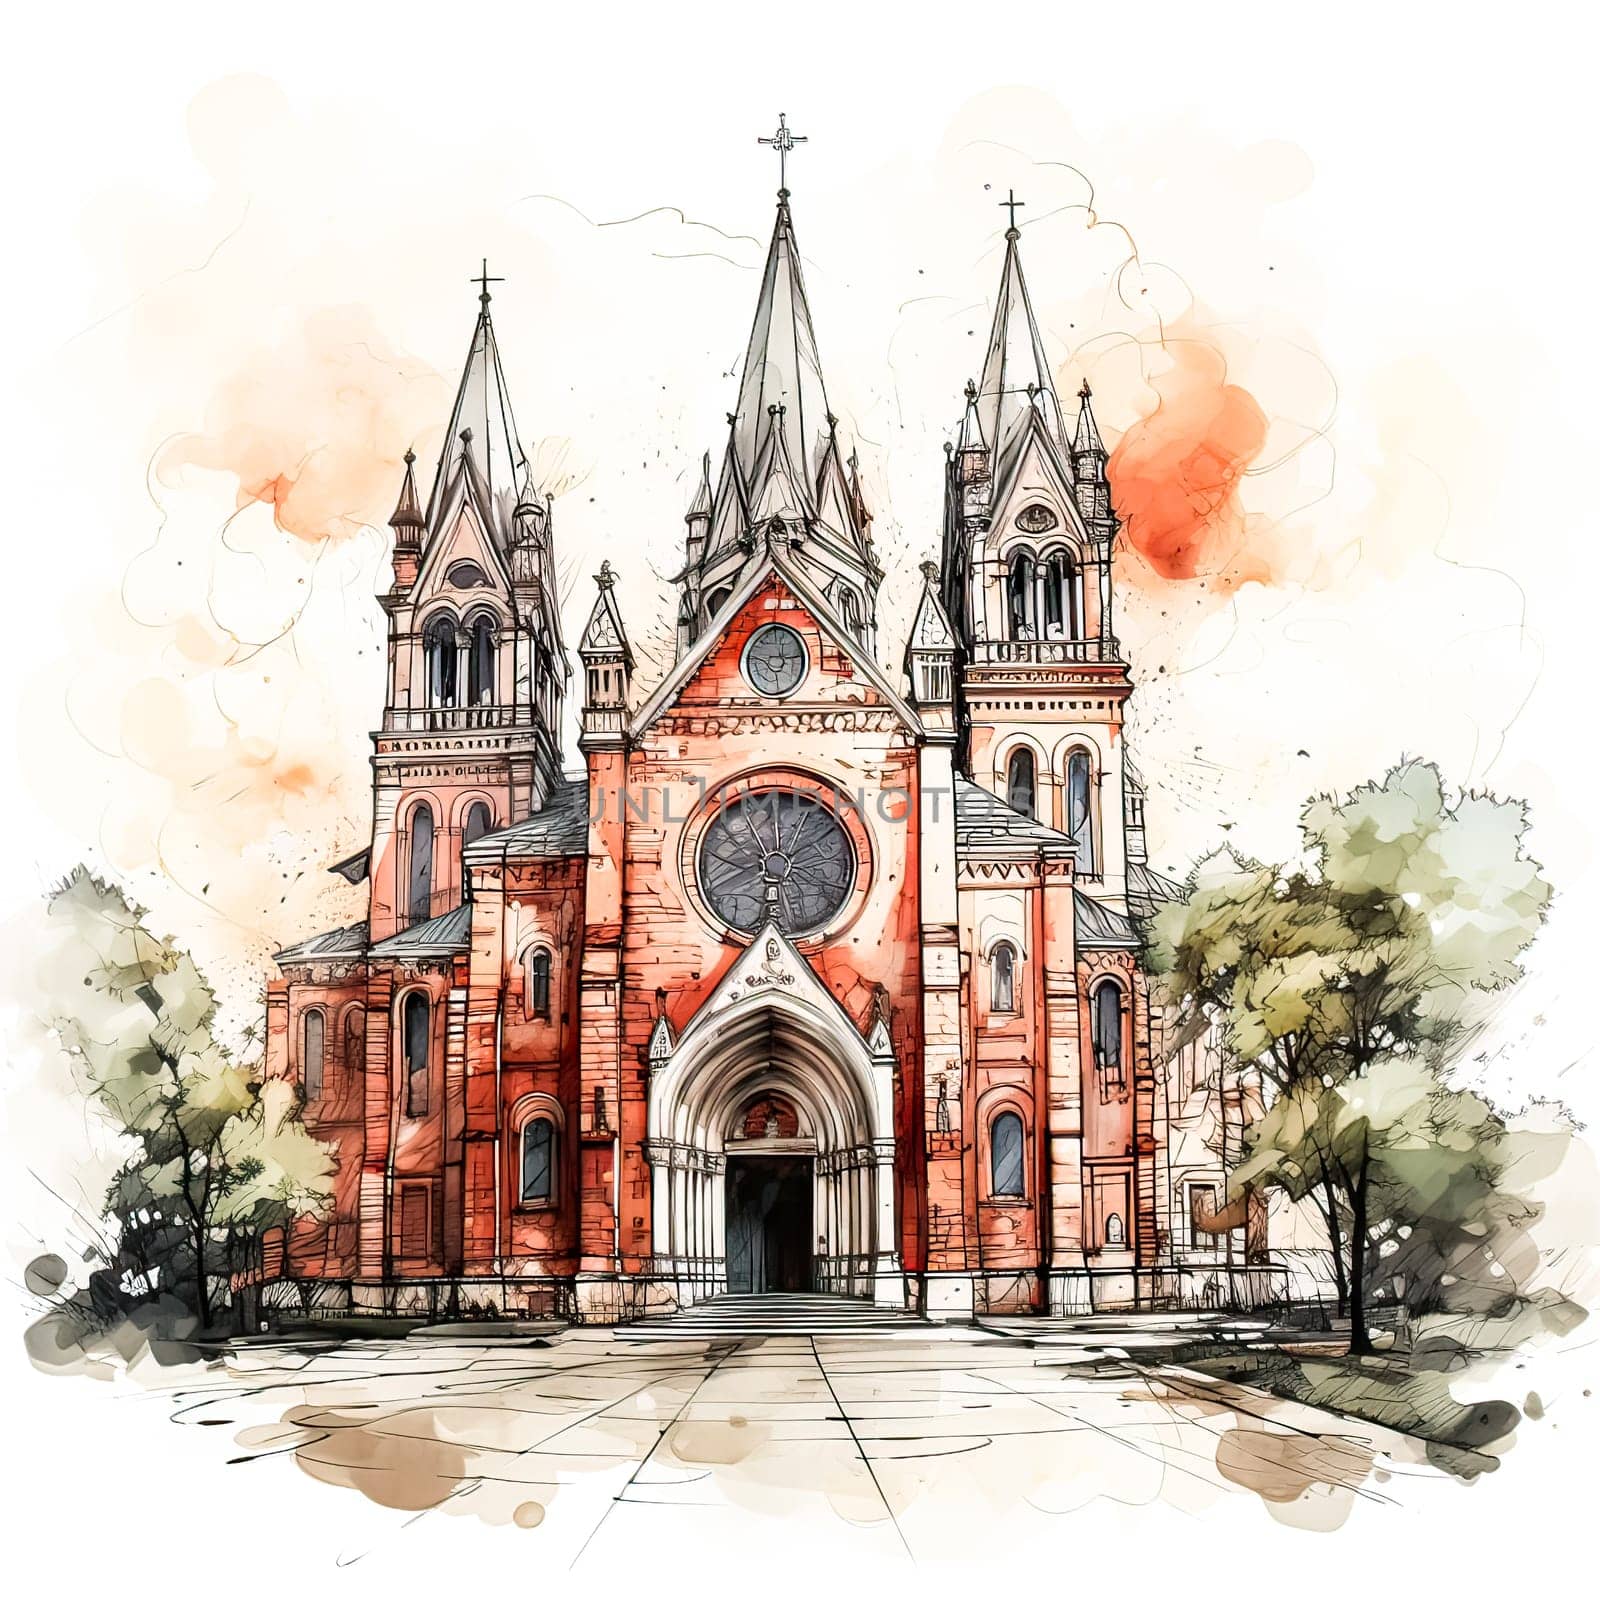 Serenity in Watercolor, A charming church in nature, captured in an artistic landscape sketch